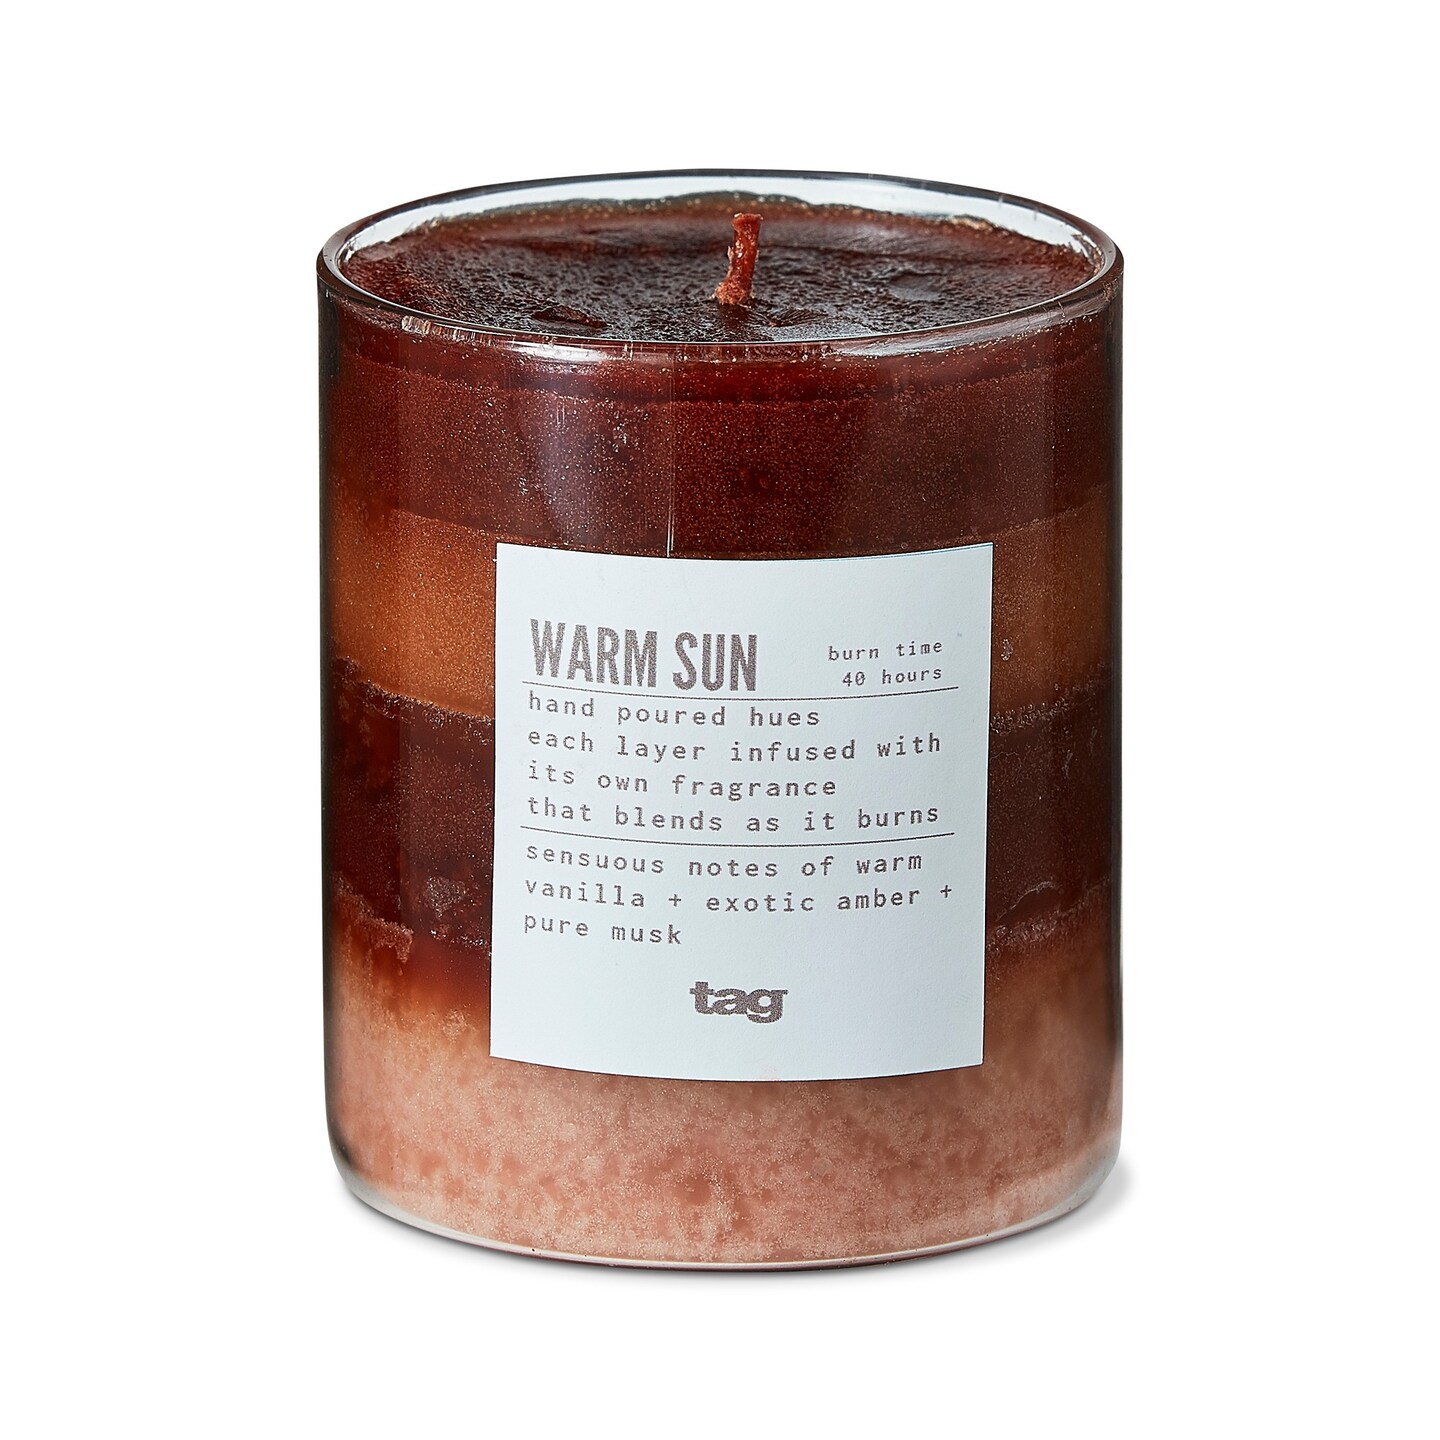 Warm Sun Scented Paraffin Wax Pillar Candle Small, Brown, 3x3.3 inch, Burn Time 55 Hours